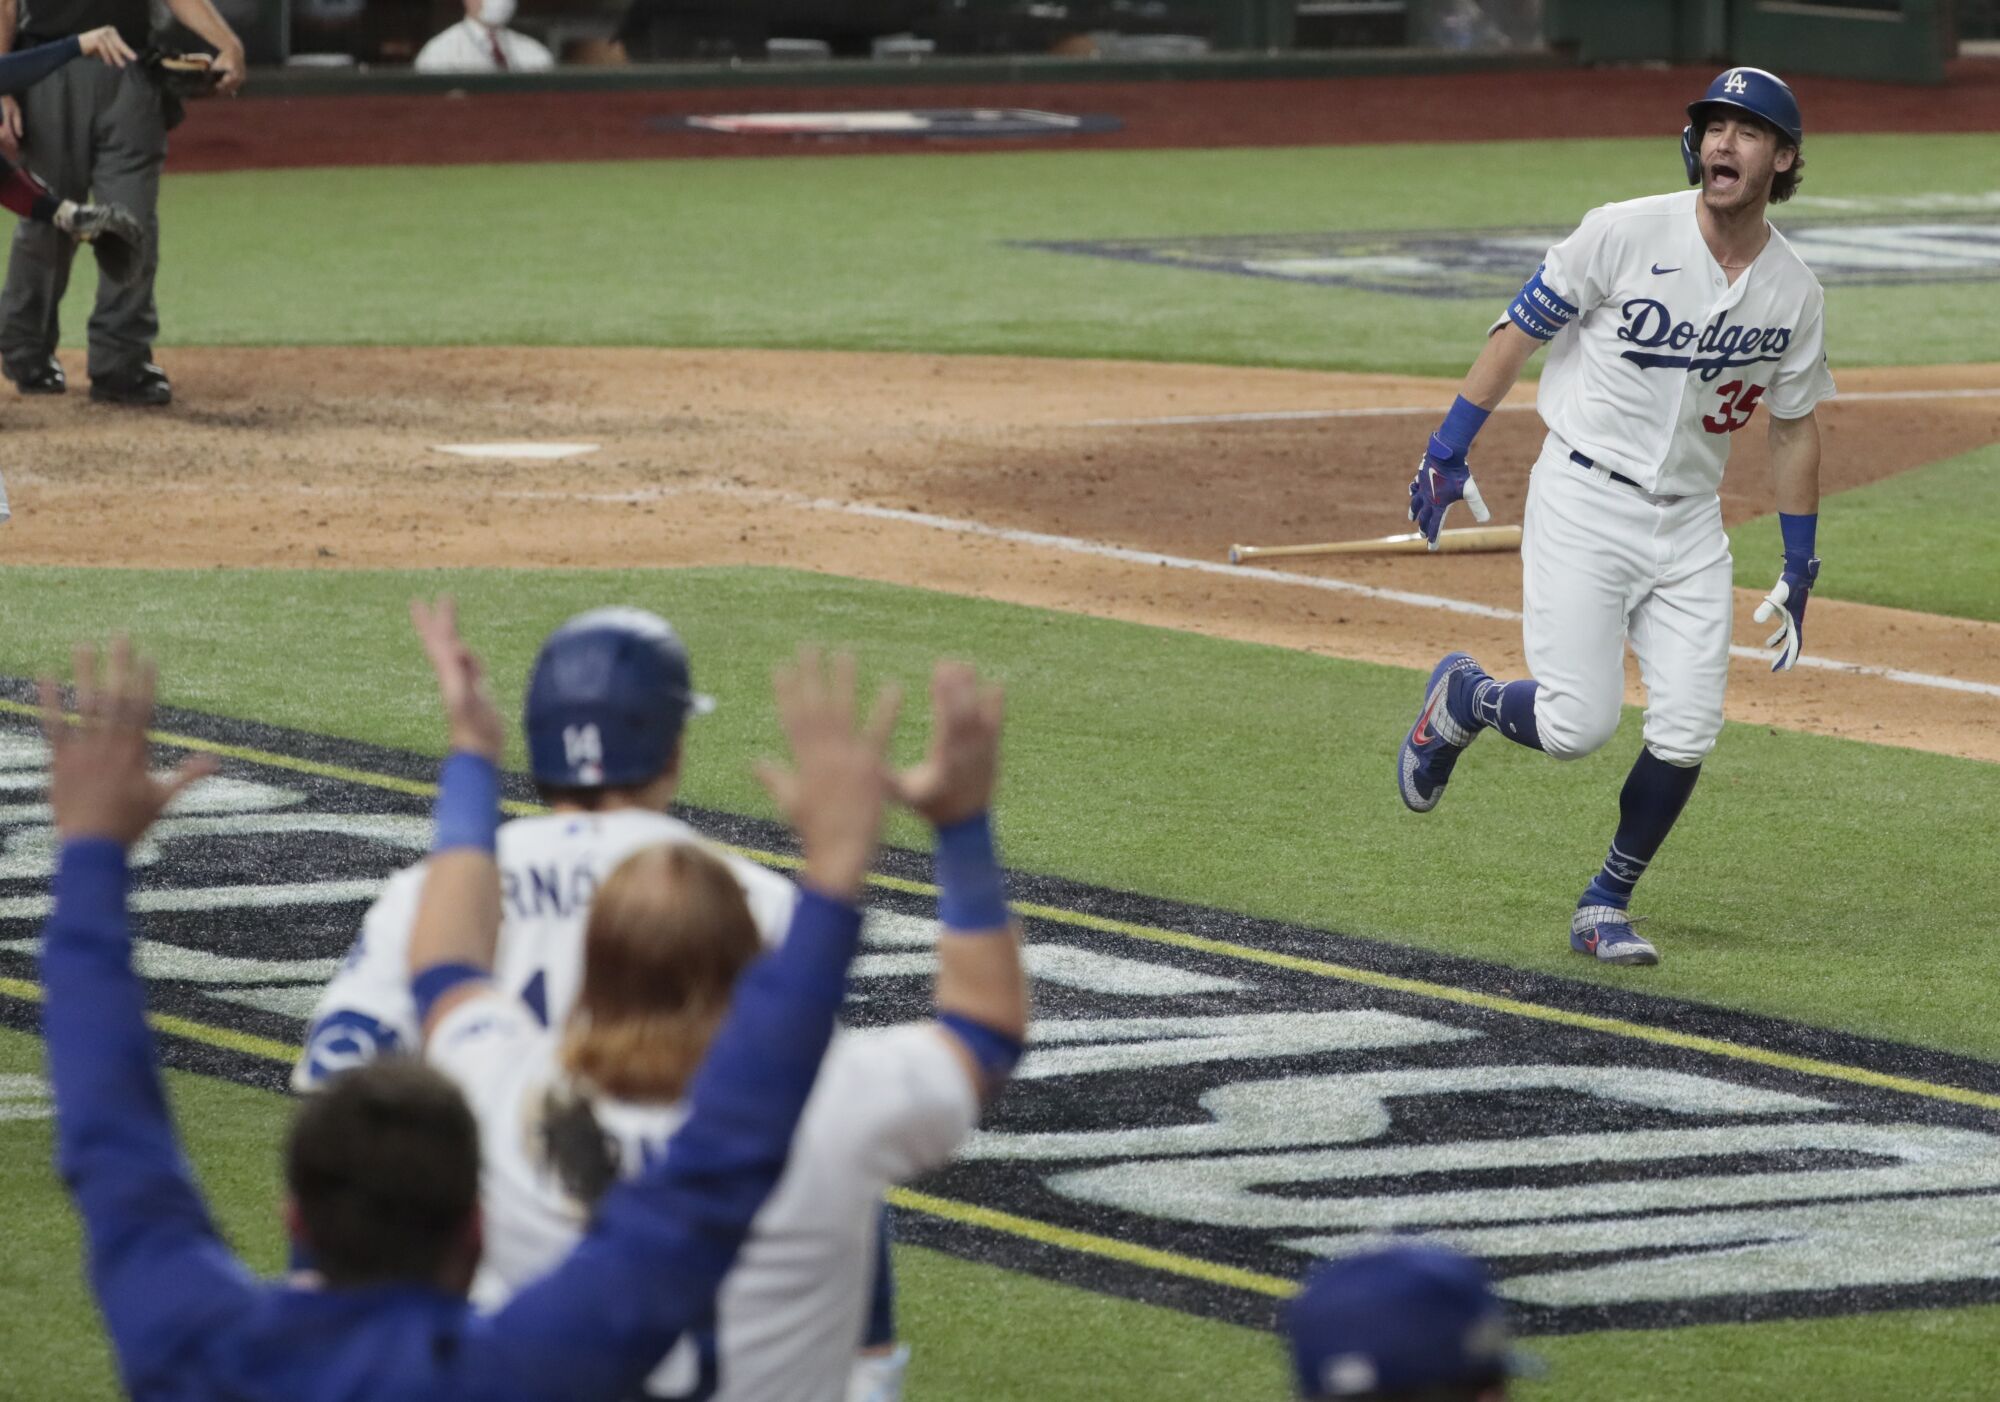 Cody Bellinger yells to the dugout on his way to first base after his seventh-inning homer.